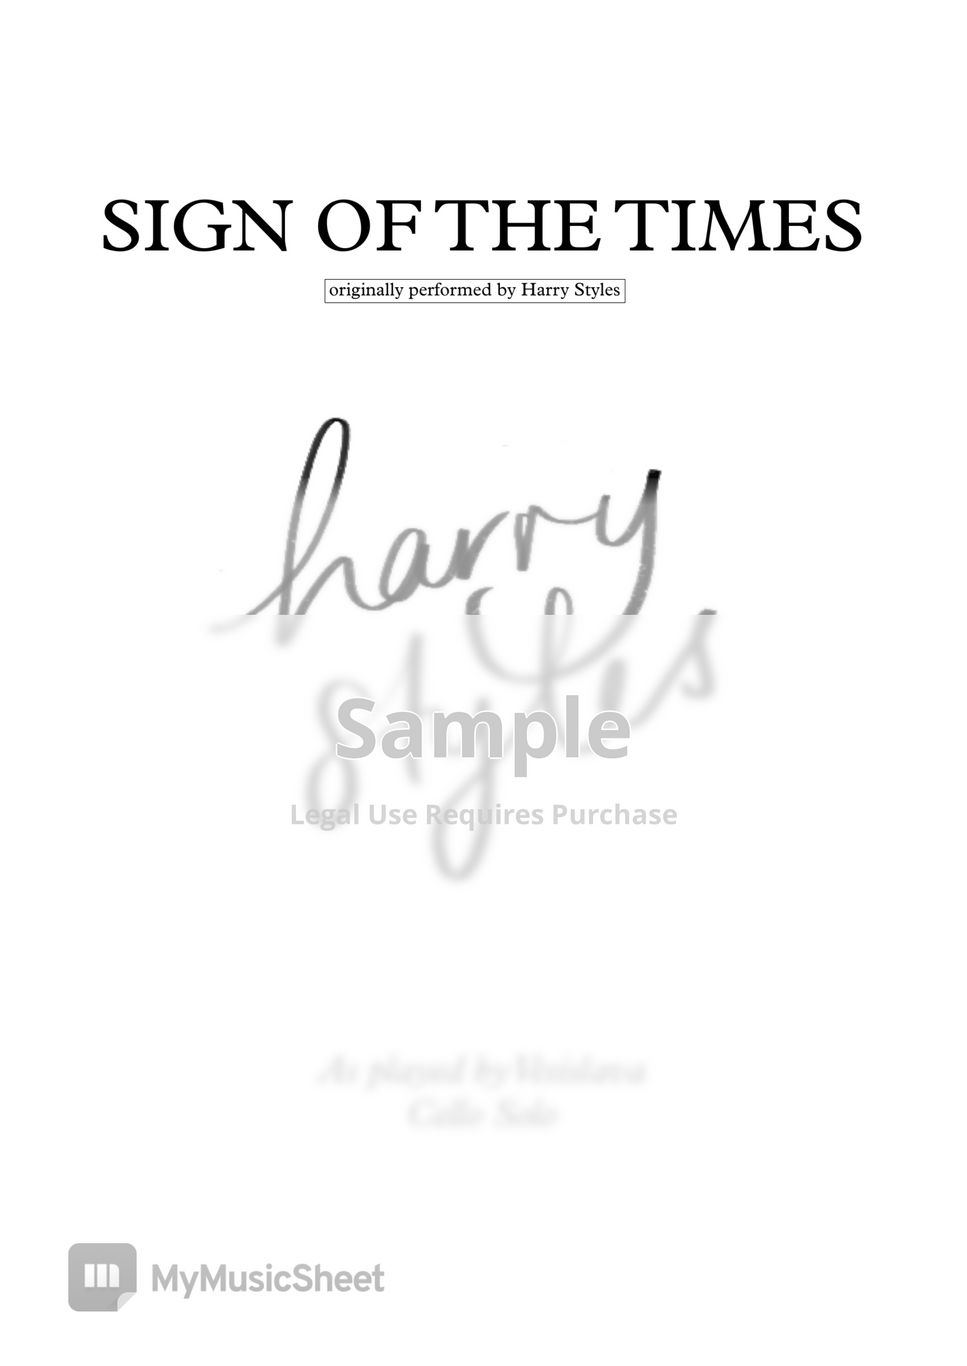 Harry Styles - Sign of the Times (+Finger marks) by Vesislava